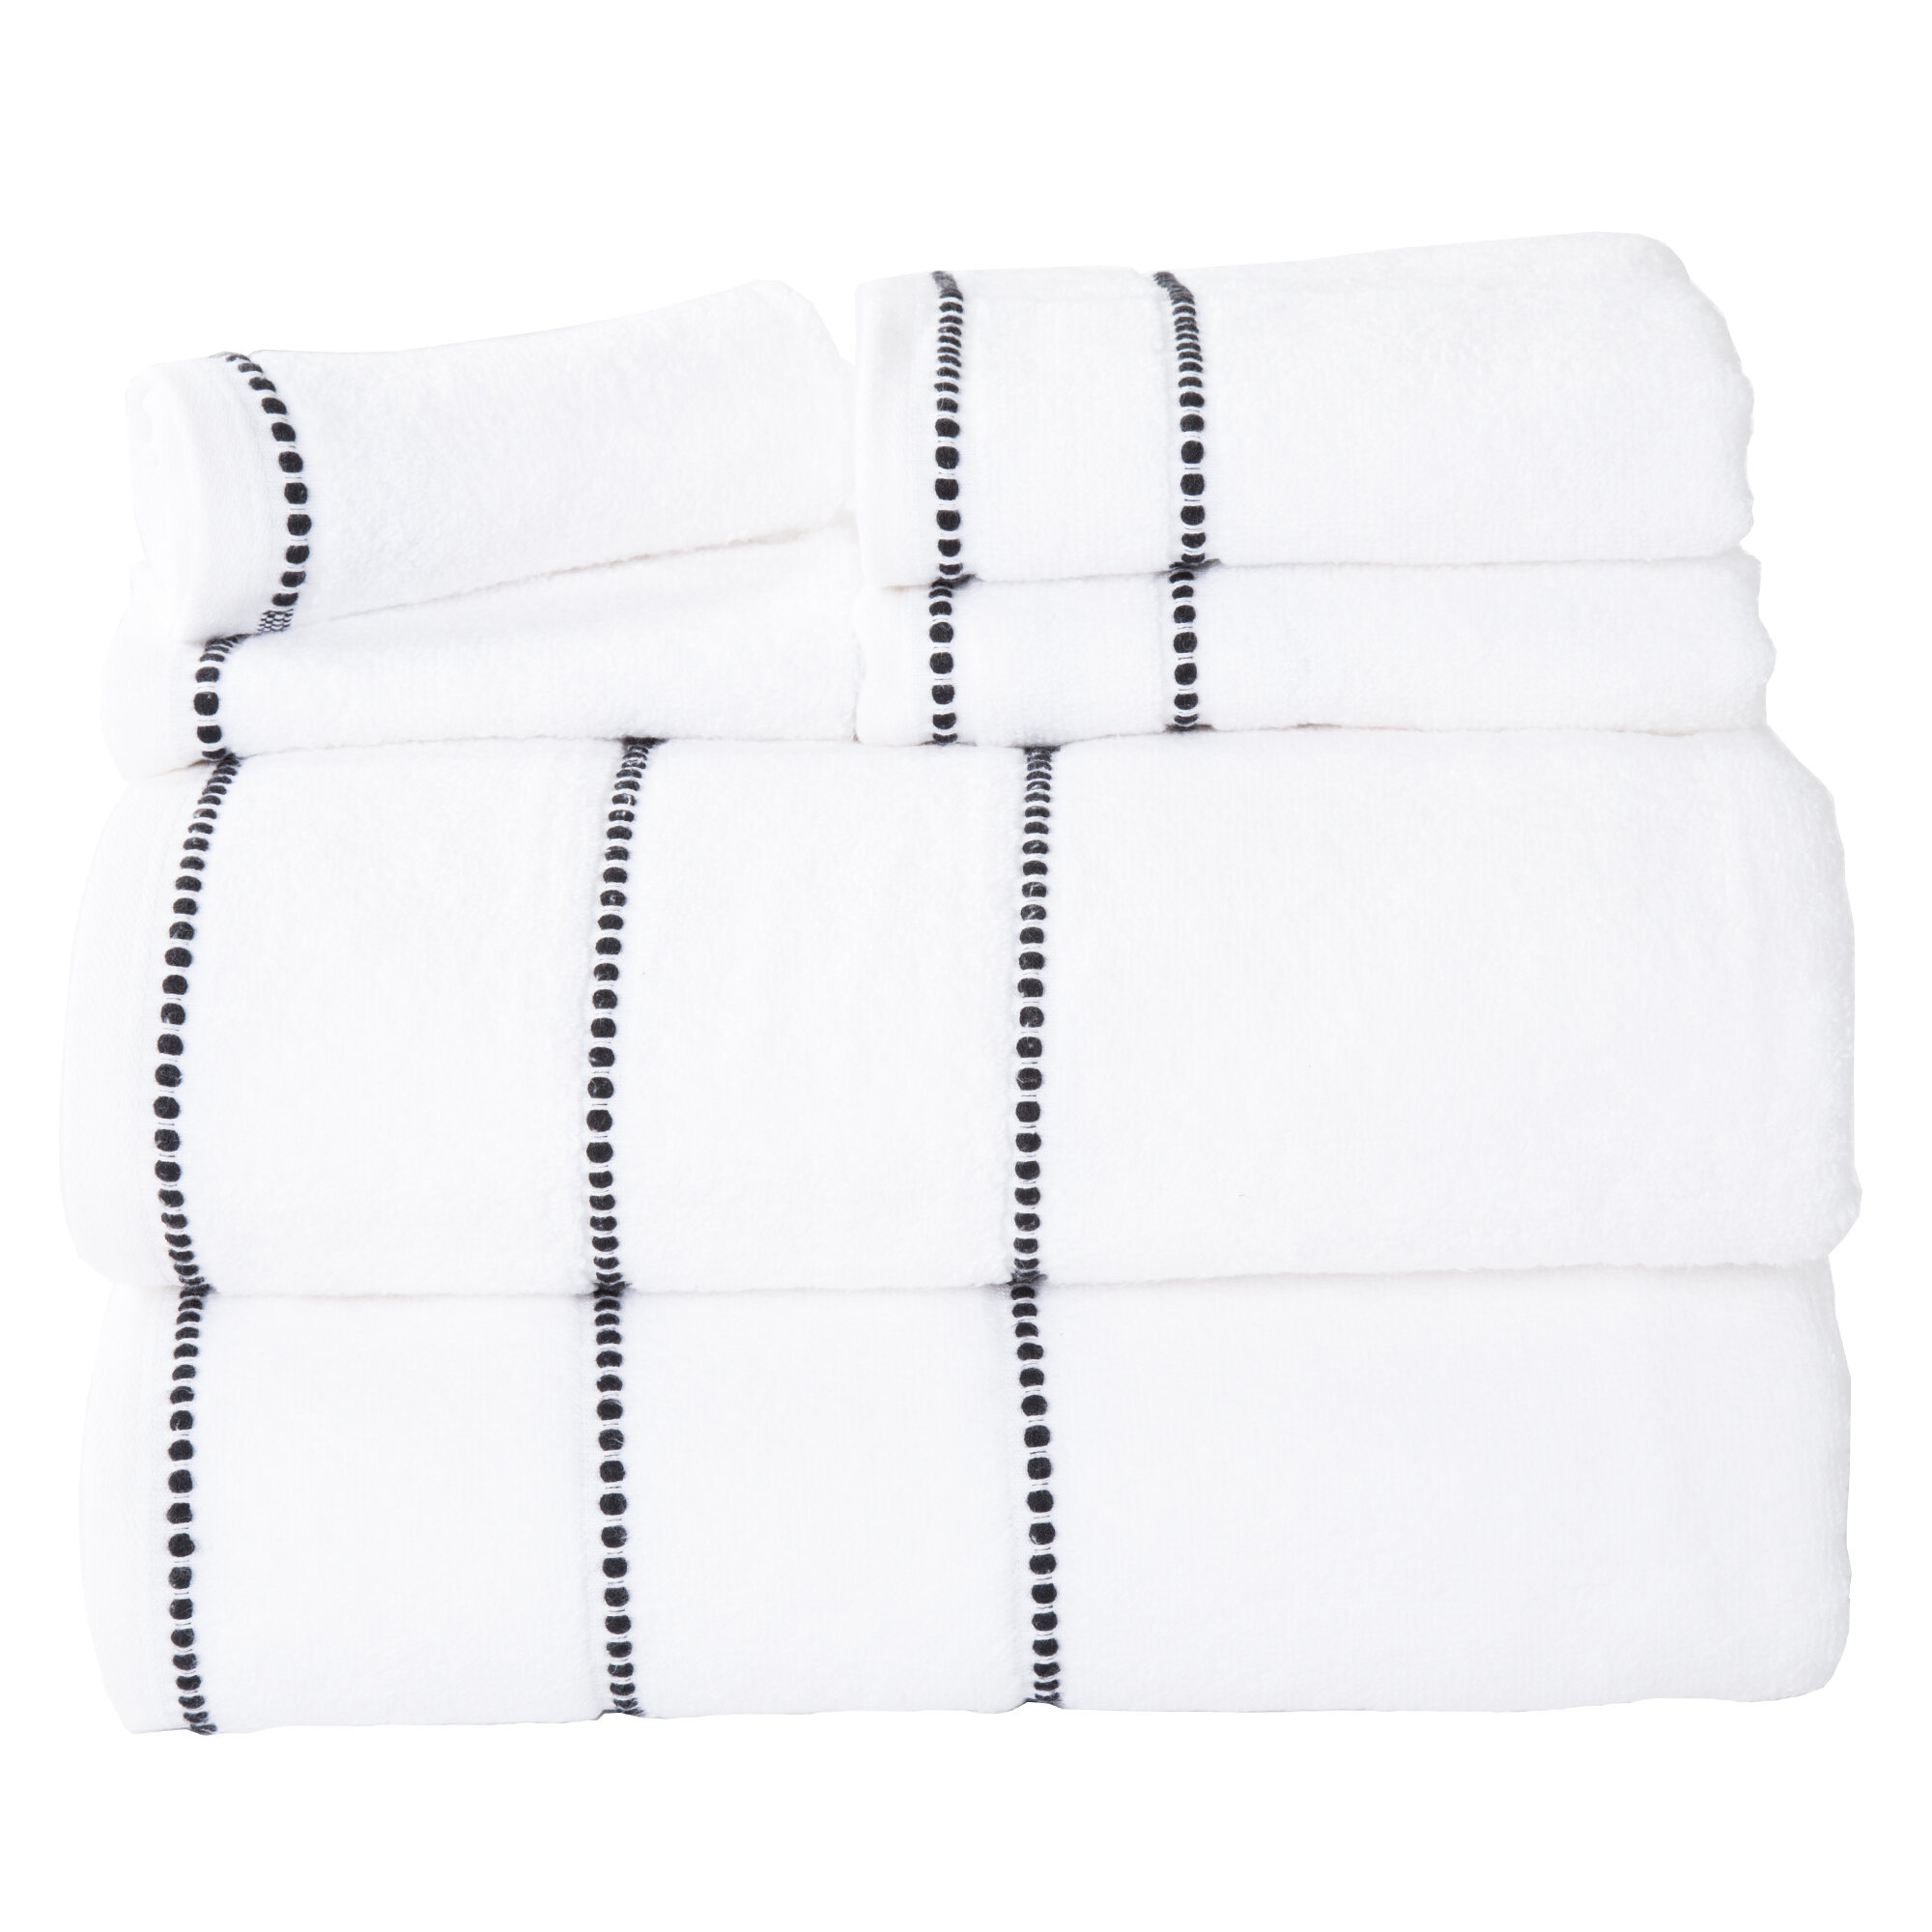  100 Percent Cotton Towel Set, Zero Twist, Soft and Absorbent 6  Piece Set With 2 Bath Towels, 2 Hand Towels and 2 Washcloths (Silver) By  Lavish Home : Home & Kitchen